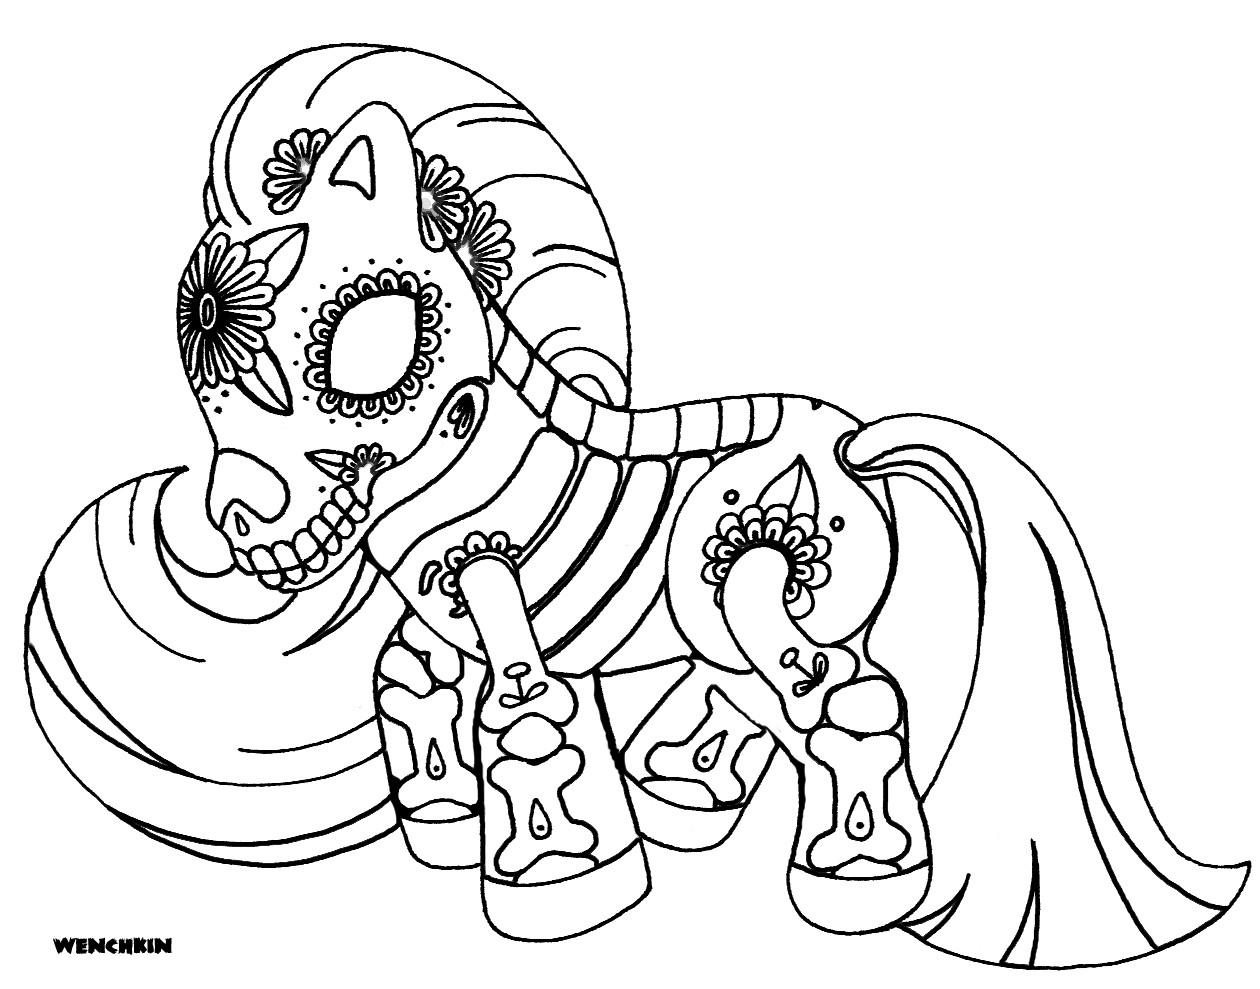 Girly Coloring Pages Printable
 Yucca Flats N M Wenchkin s coloring pages skele pony